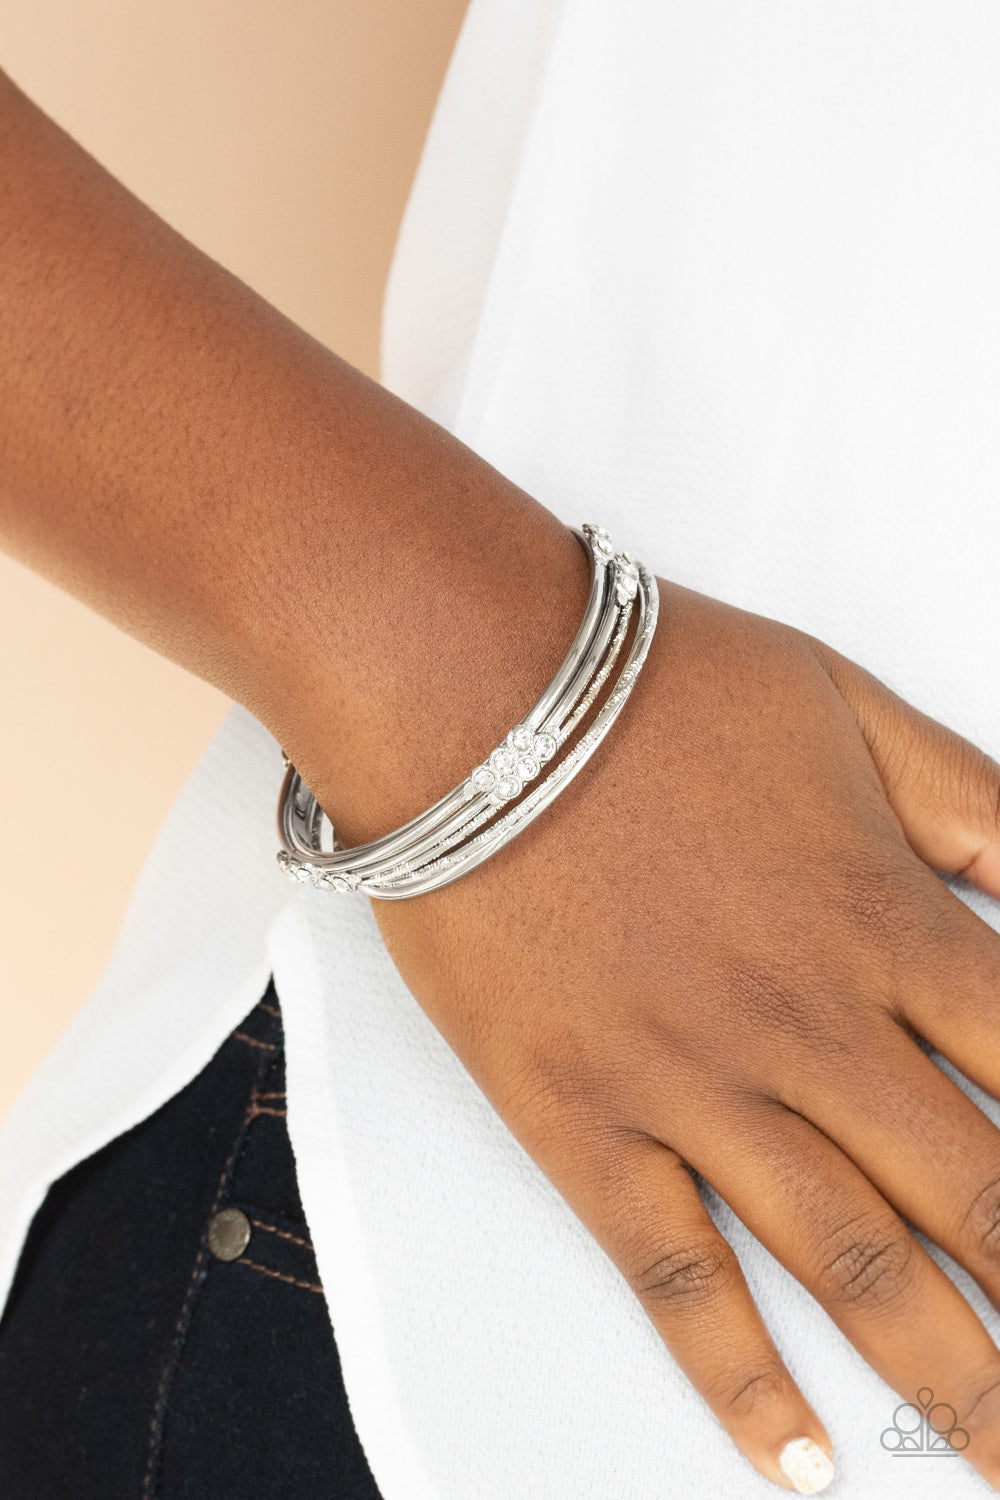 Stackable Sparkle - White